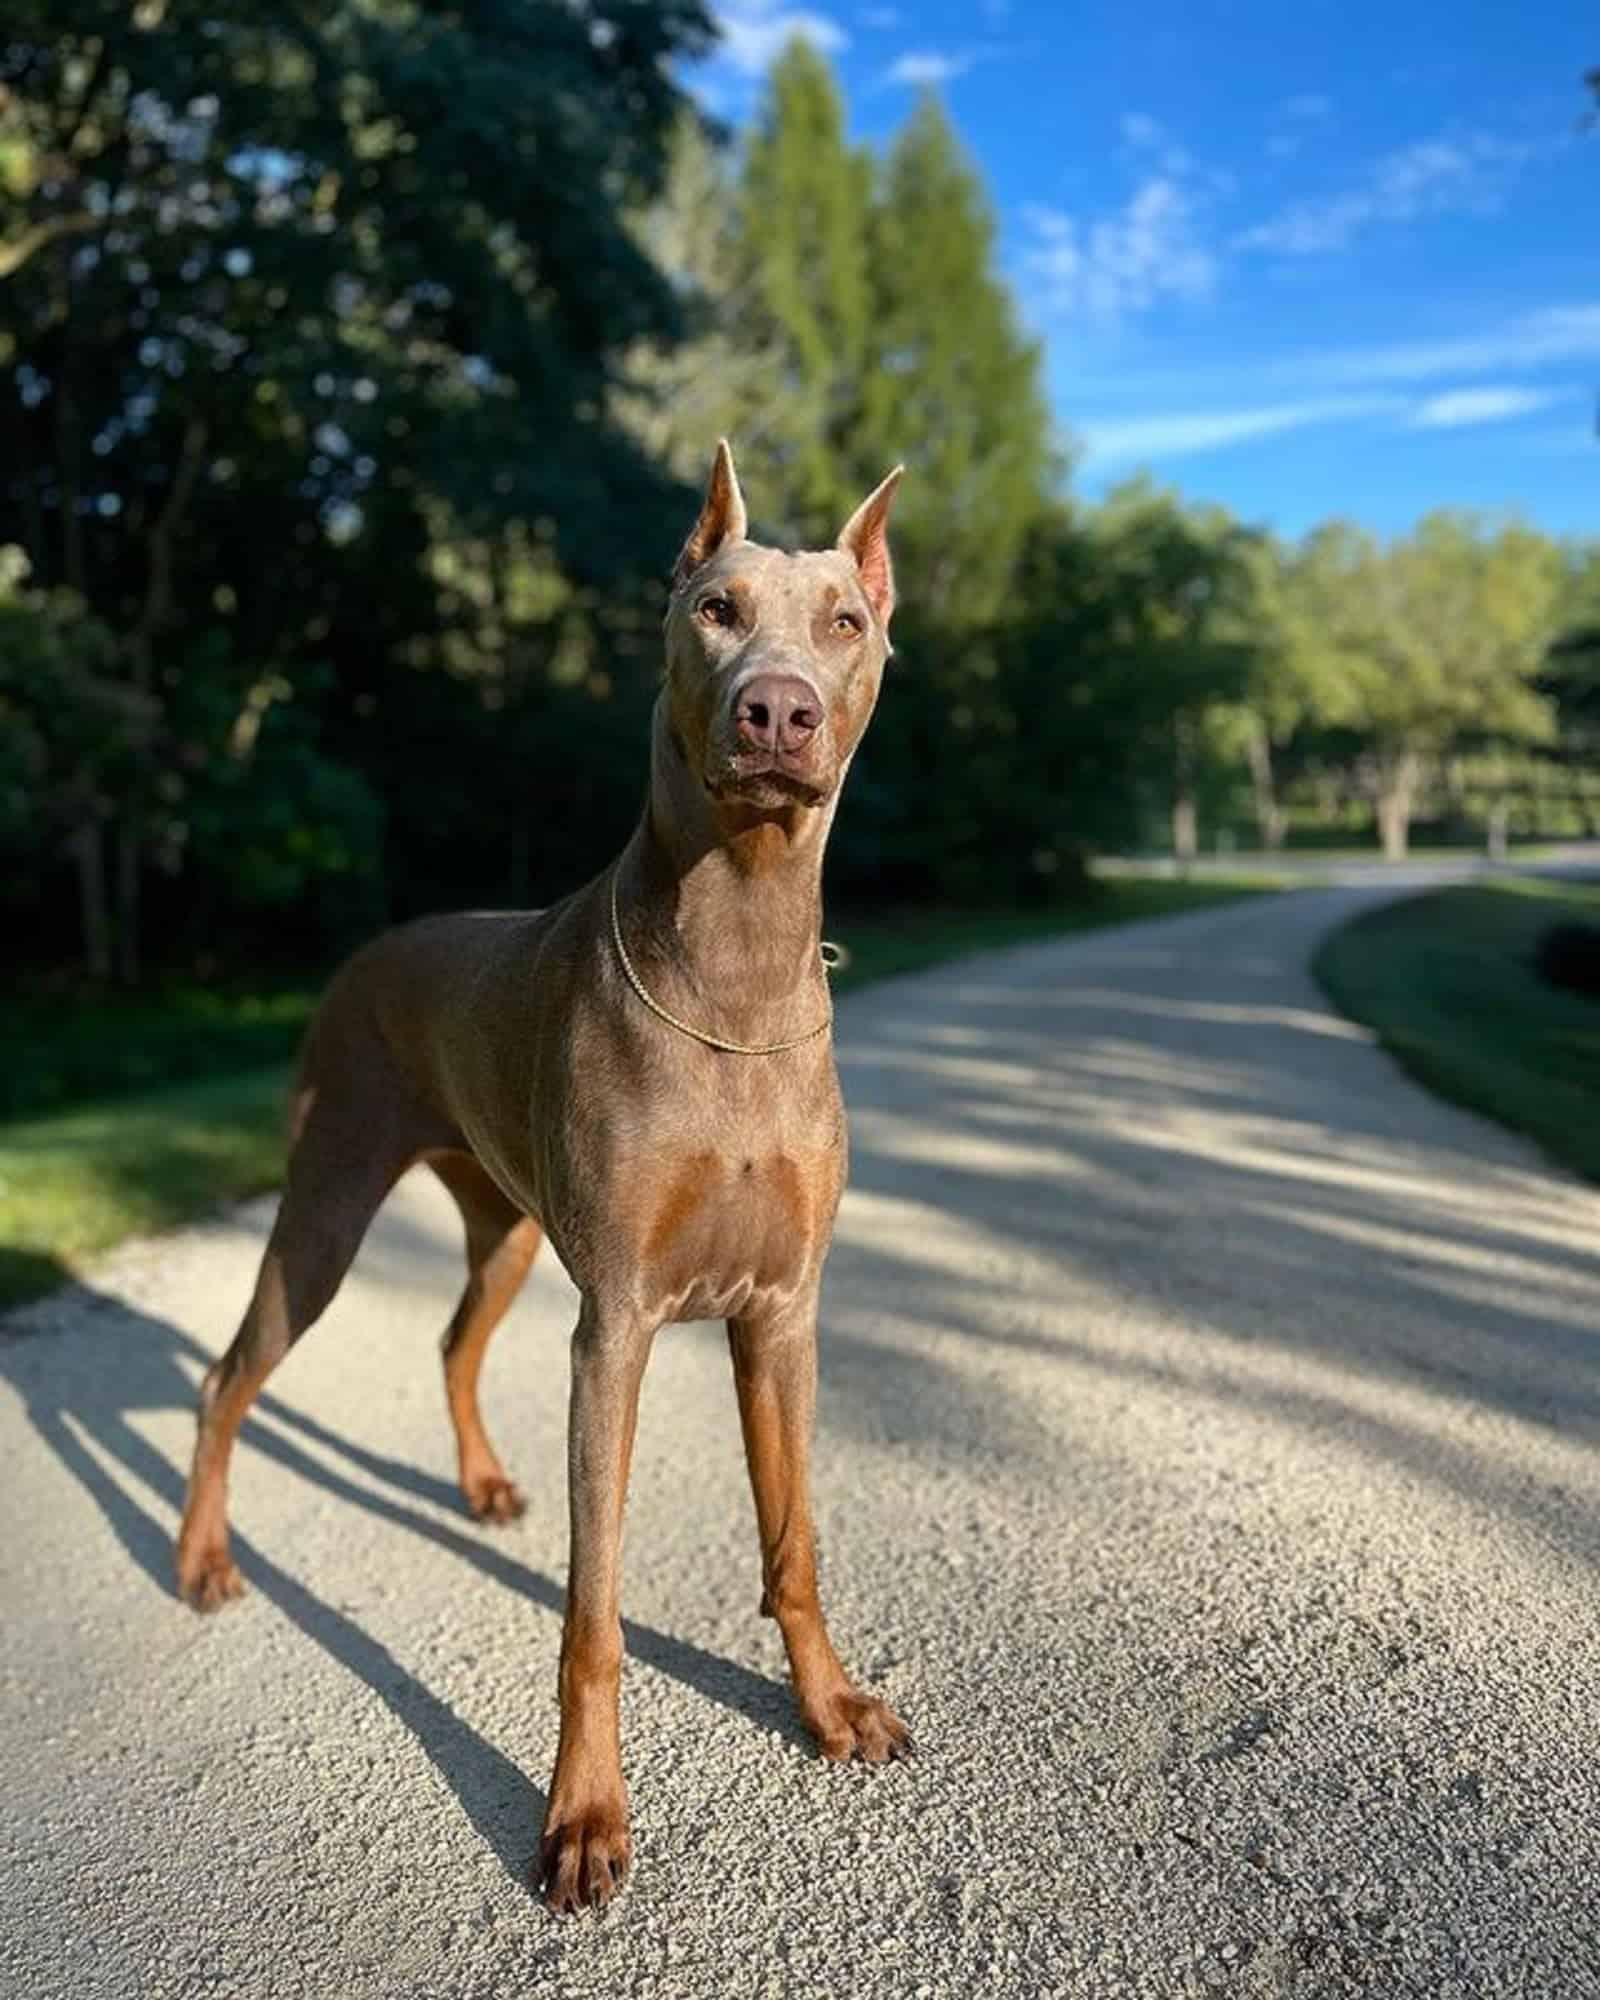 isabella doberman standing on a path in the park